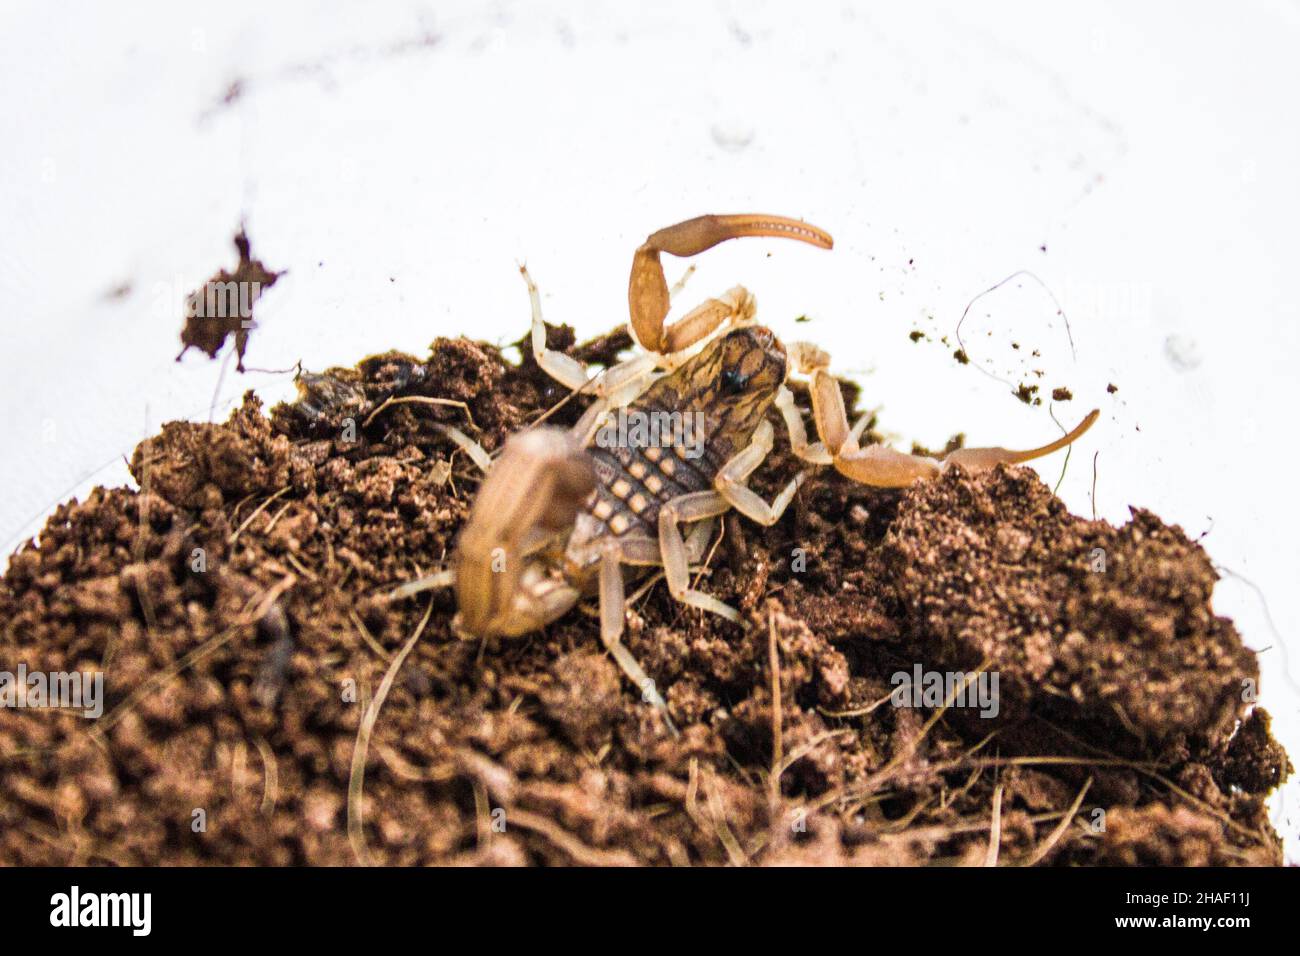 Hottentotta hottentotta is a genus of scorpions of the family Buthidae. It is distributed widely across Africa. Very poisonous for people, able to rep Stock Photo